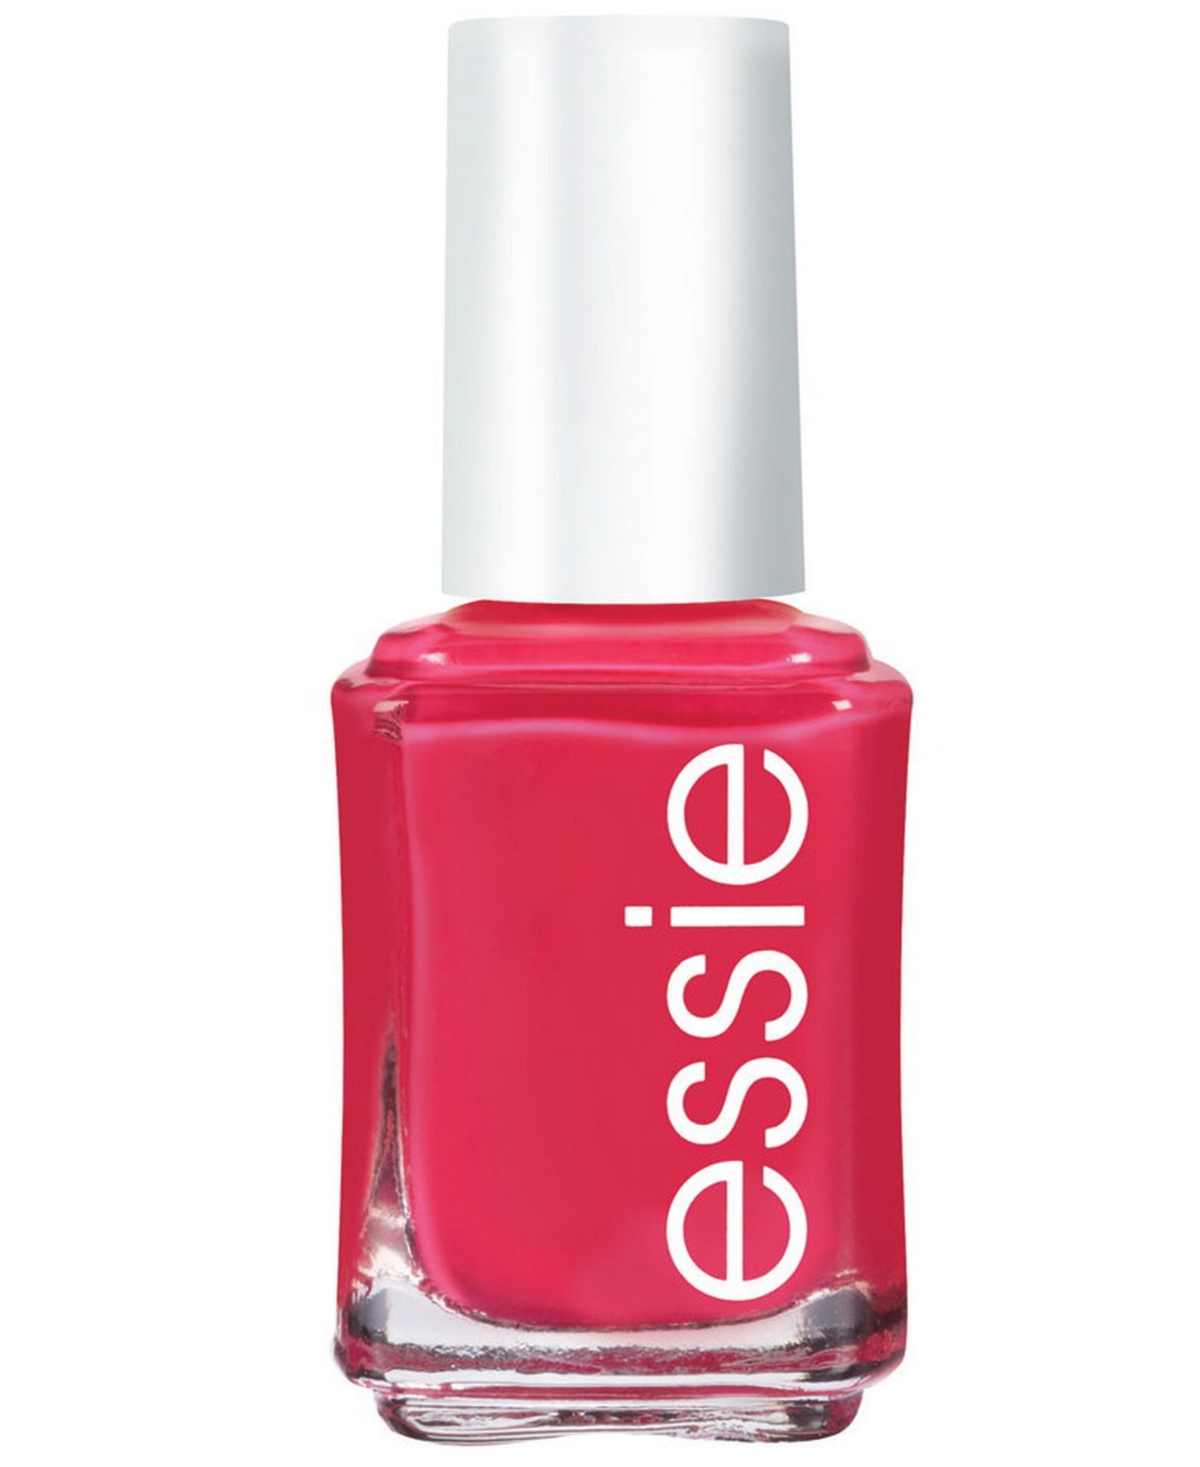 Essie Nail Polish In Pursuit Of Craftiness (lavender)